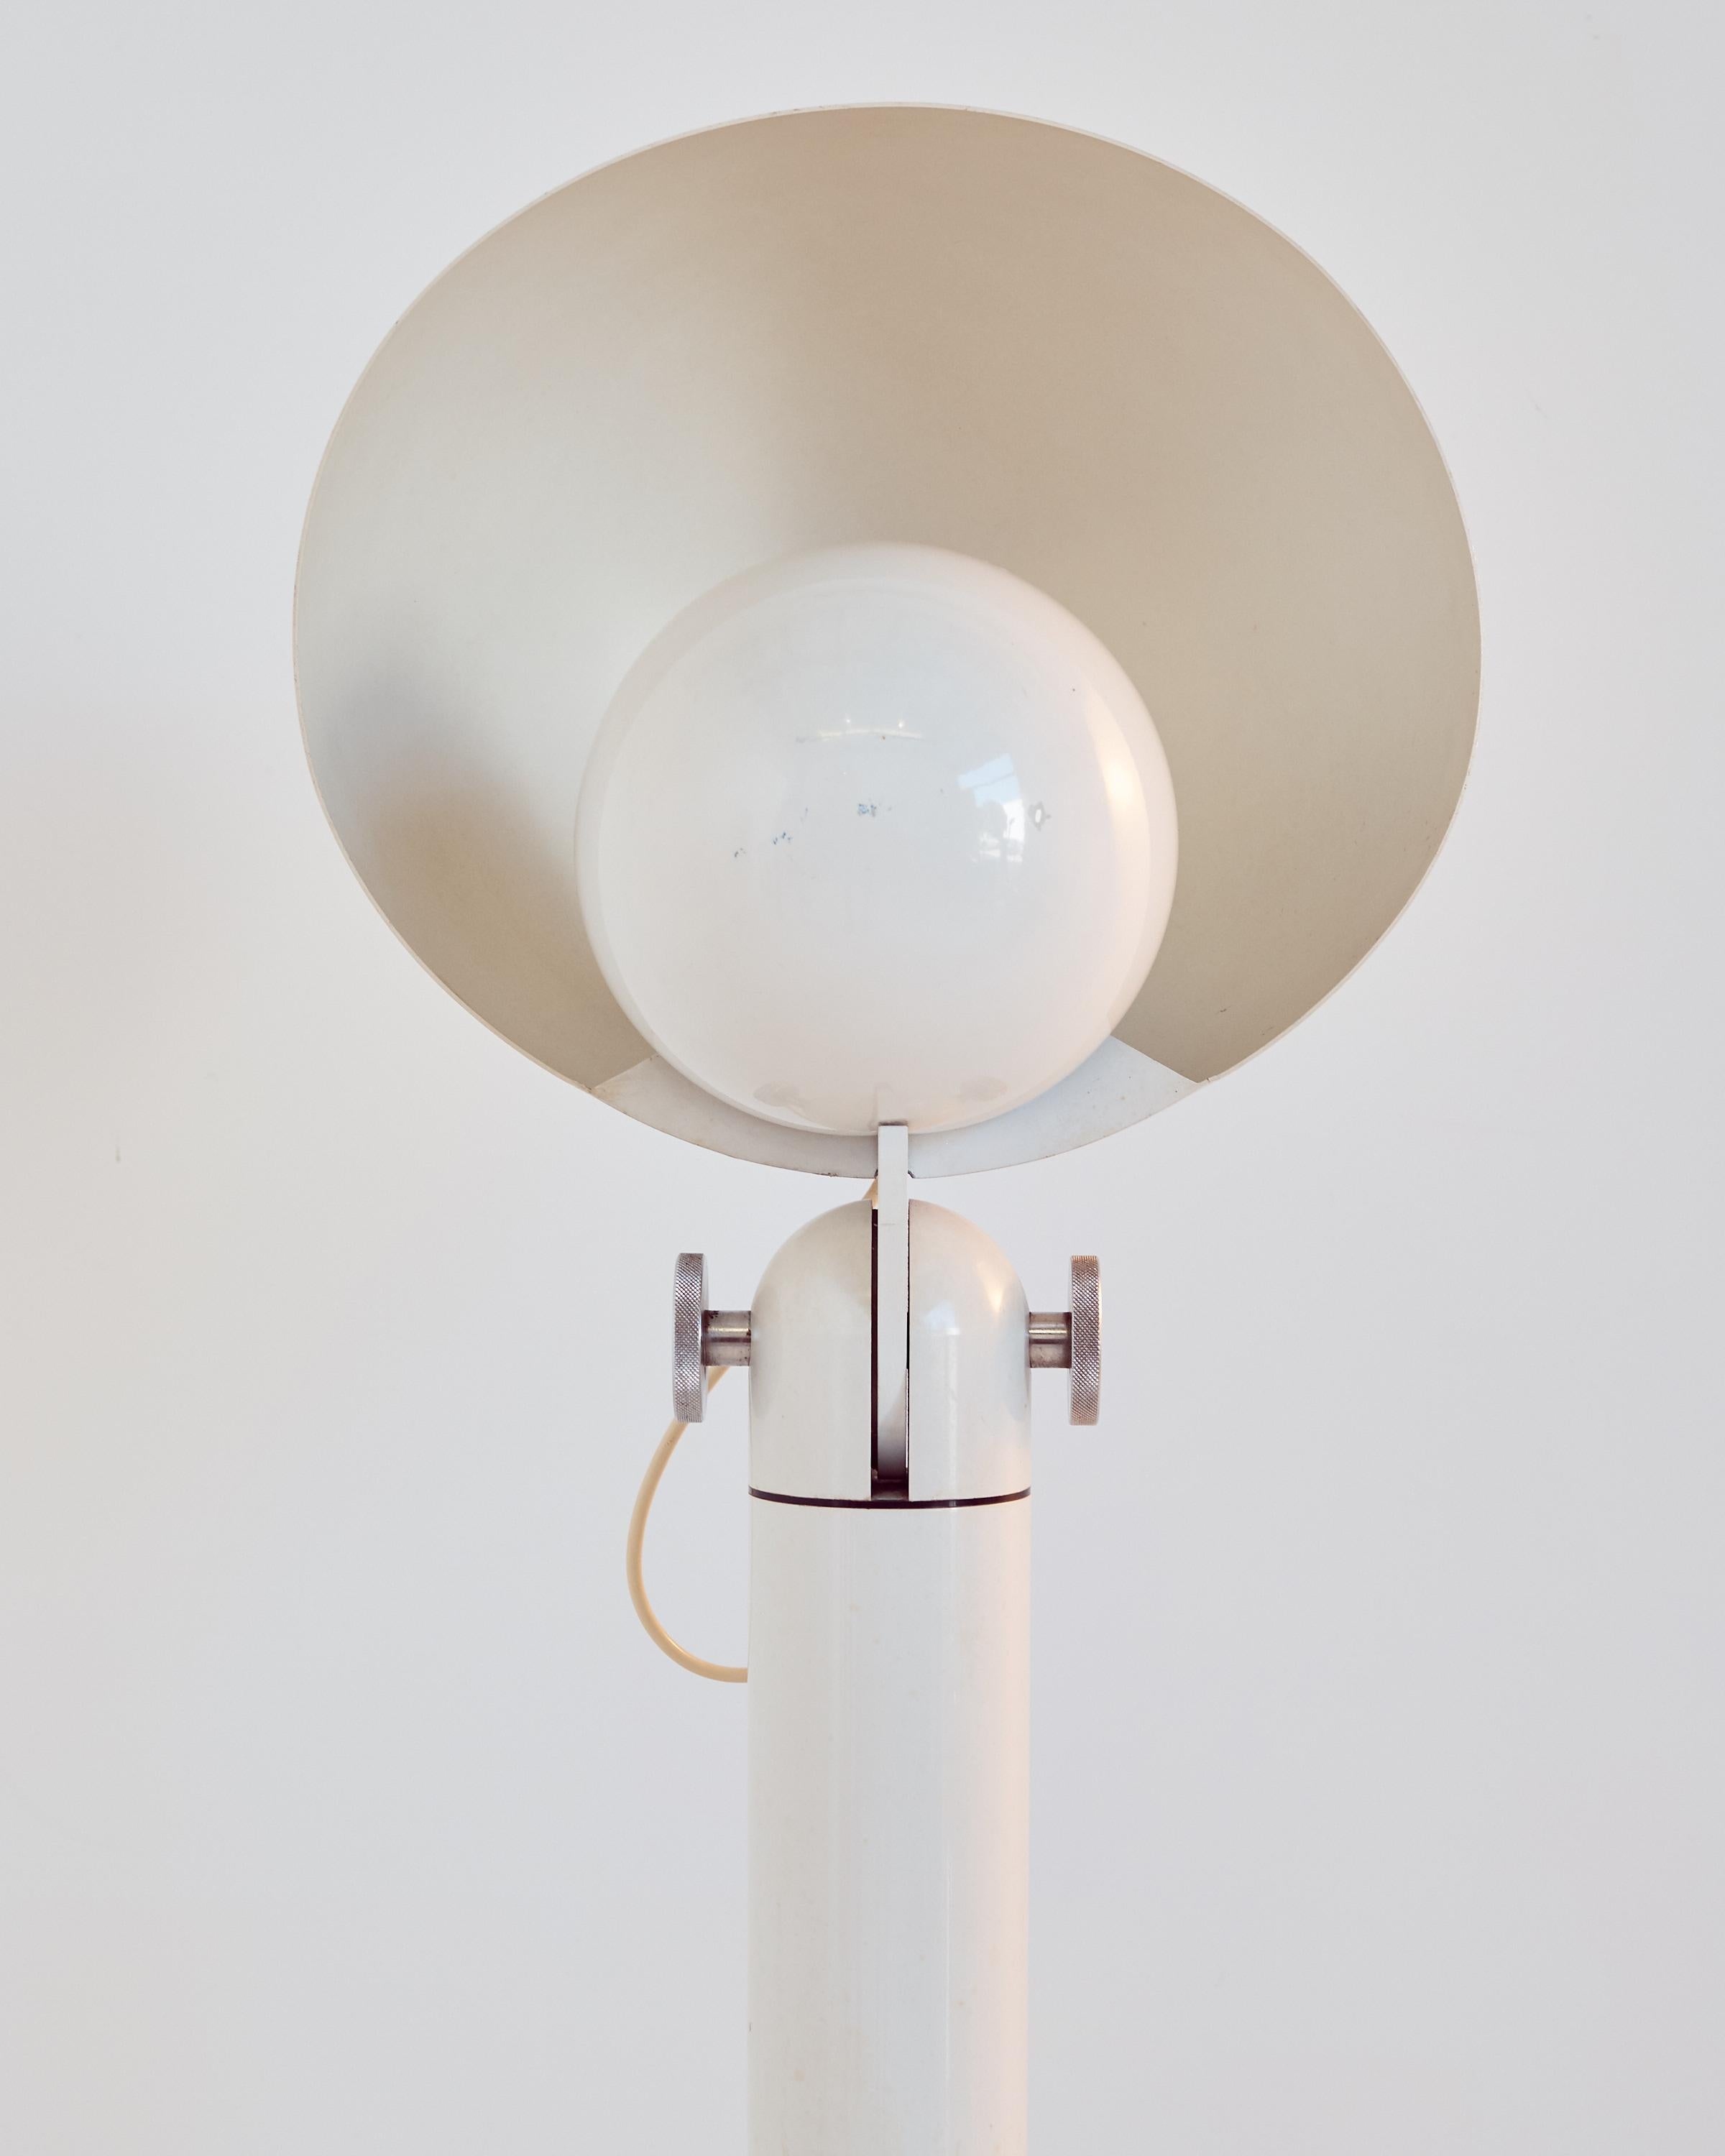 This Postmodern lamp is made of white-painted aluminum. The semicircular shade can be adjusted with large chrome screws and the inner shade provides indirect light.